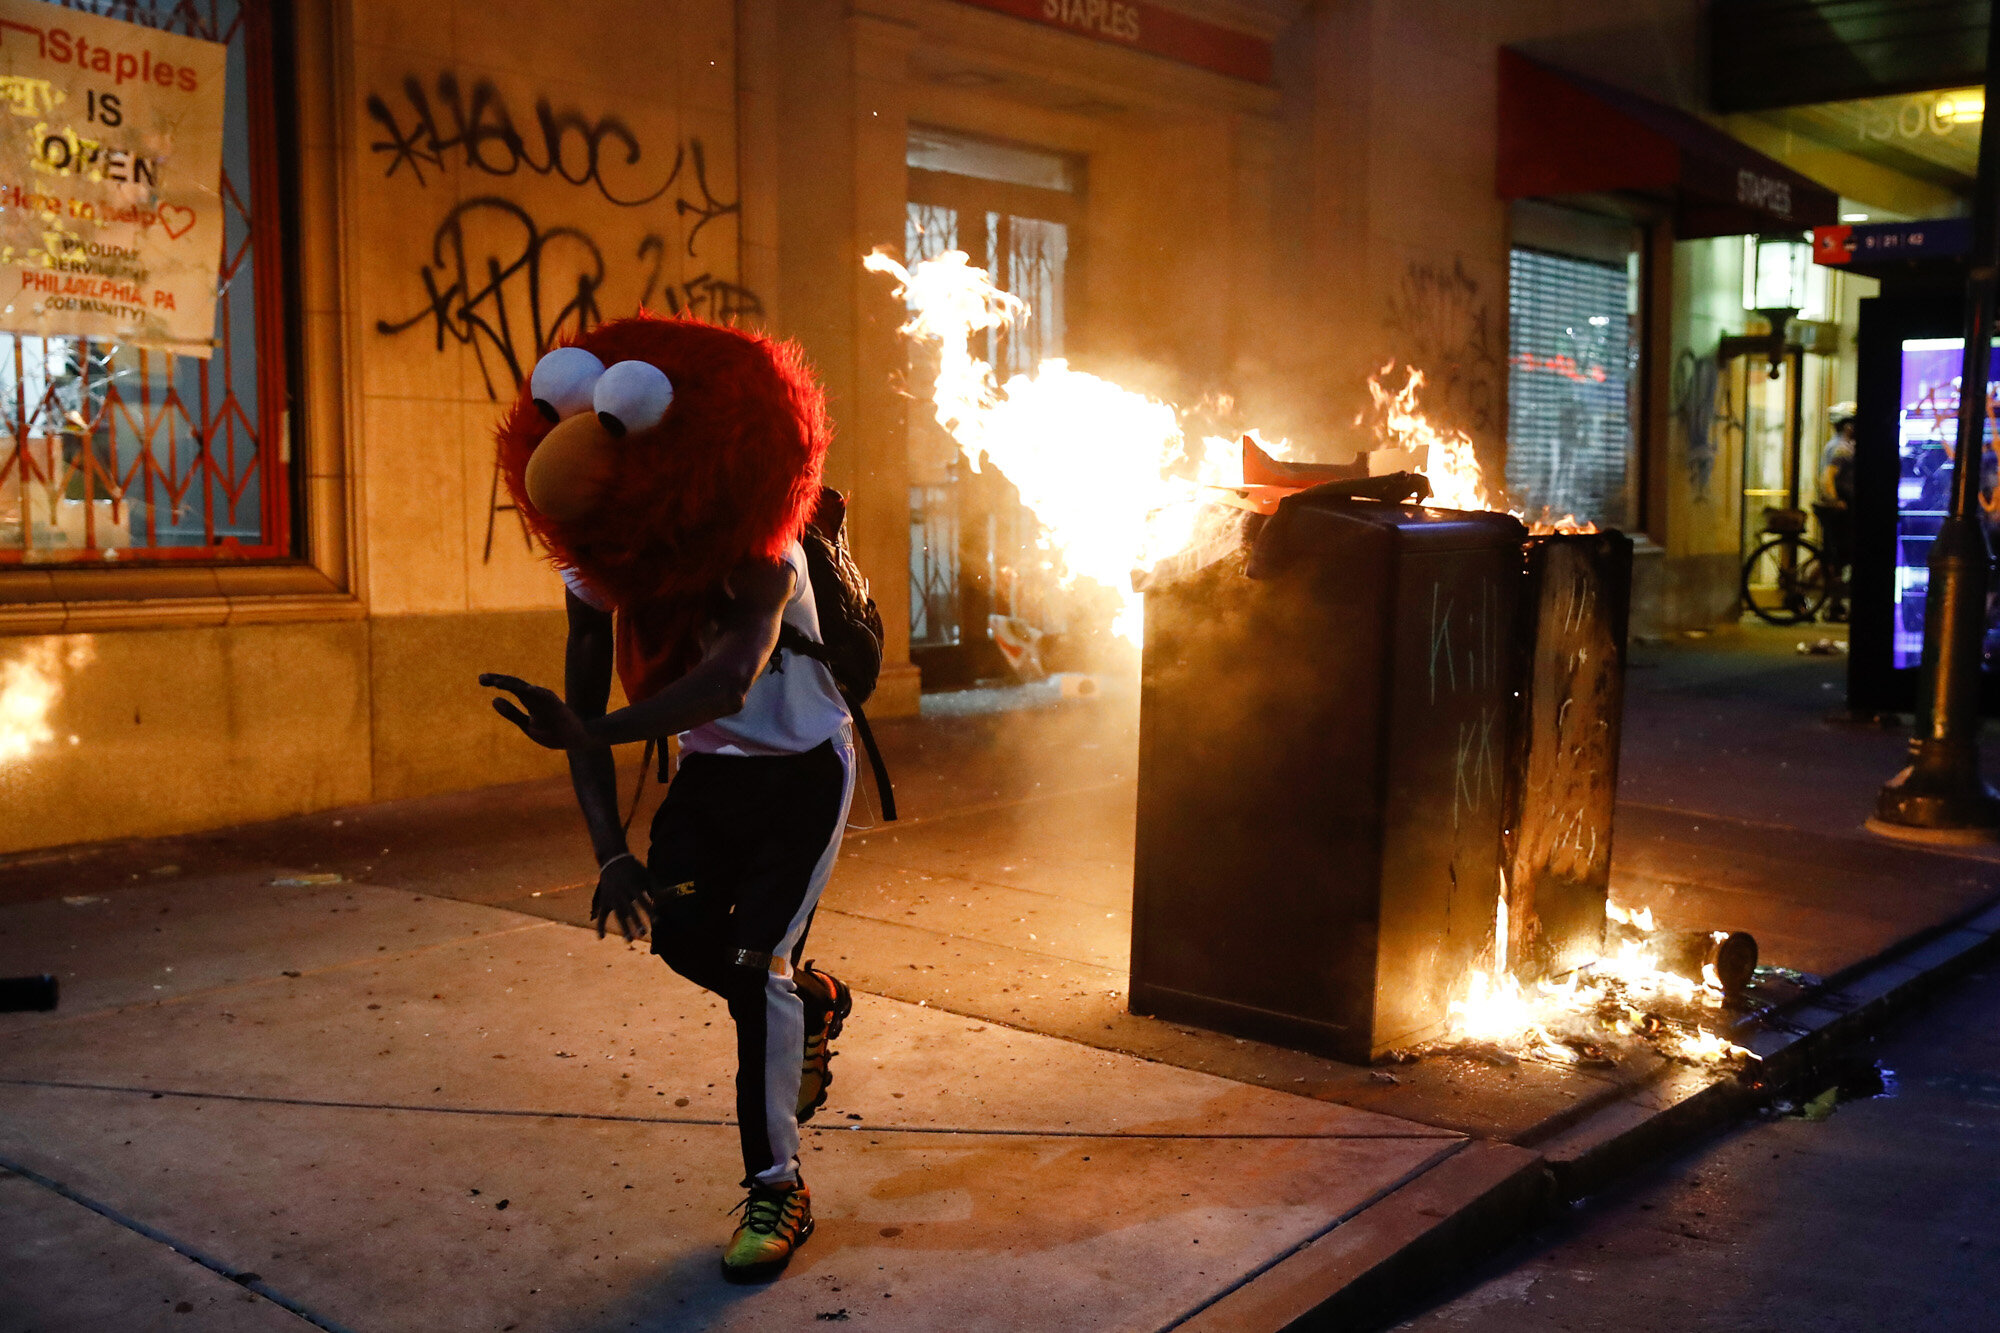  A protester in an Elmo mask dances as a street fire burns on May 30, 2020, during a protest in Philadelphia over the death of George Floyd, a Black man who was killed while in police custody in Minneapolis on May 25. (AP Photo/Matt Rourke) 